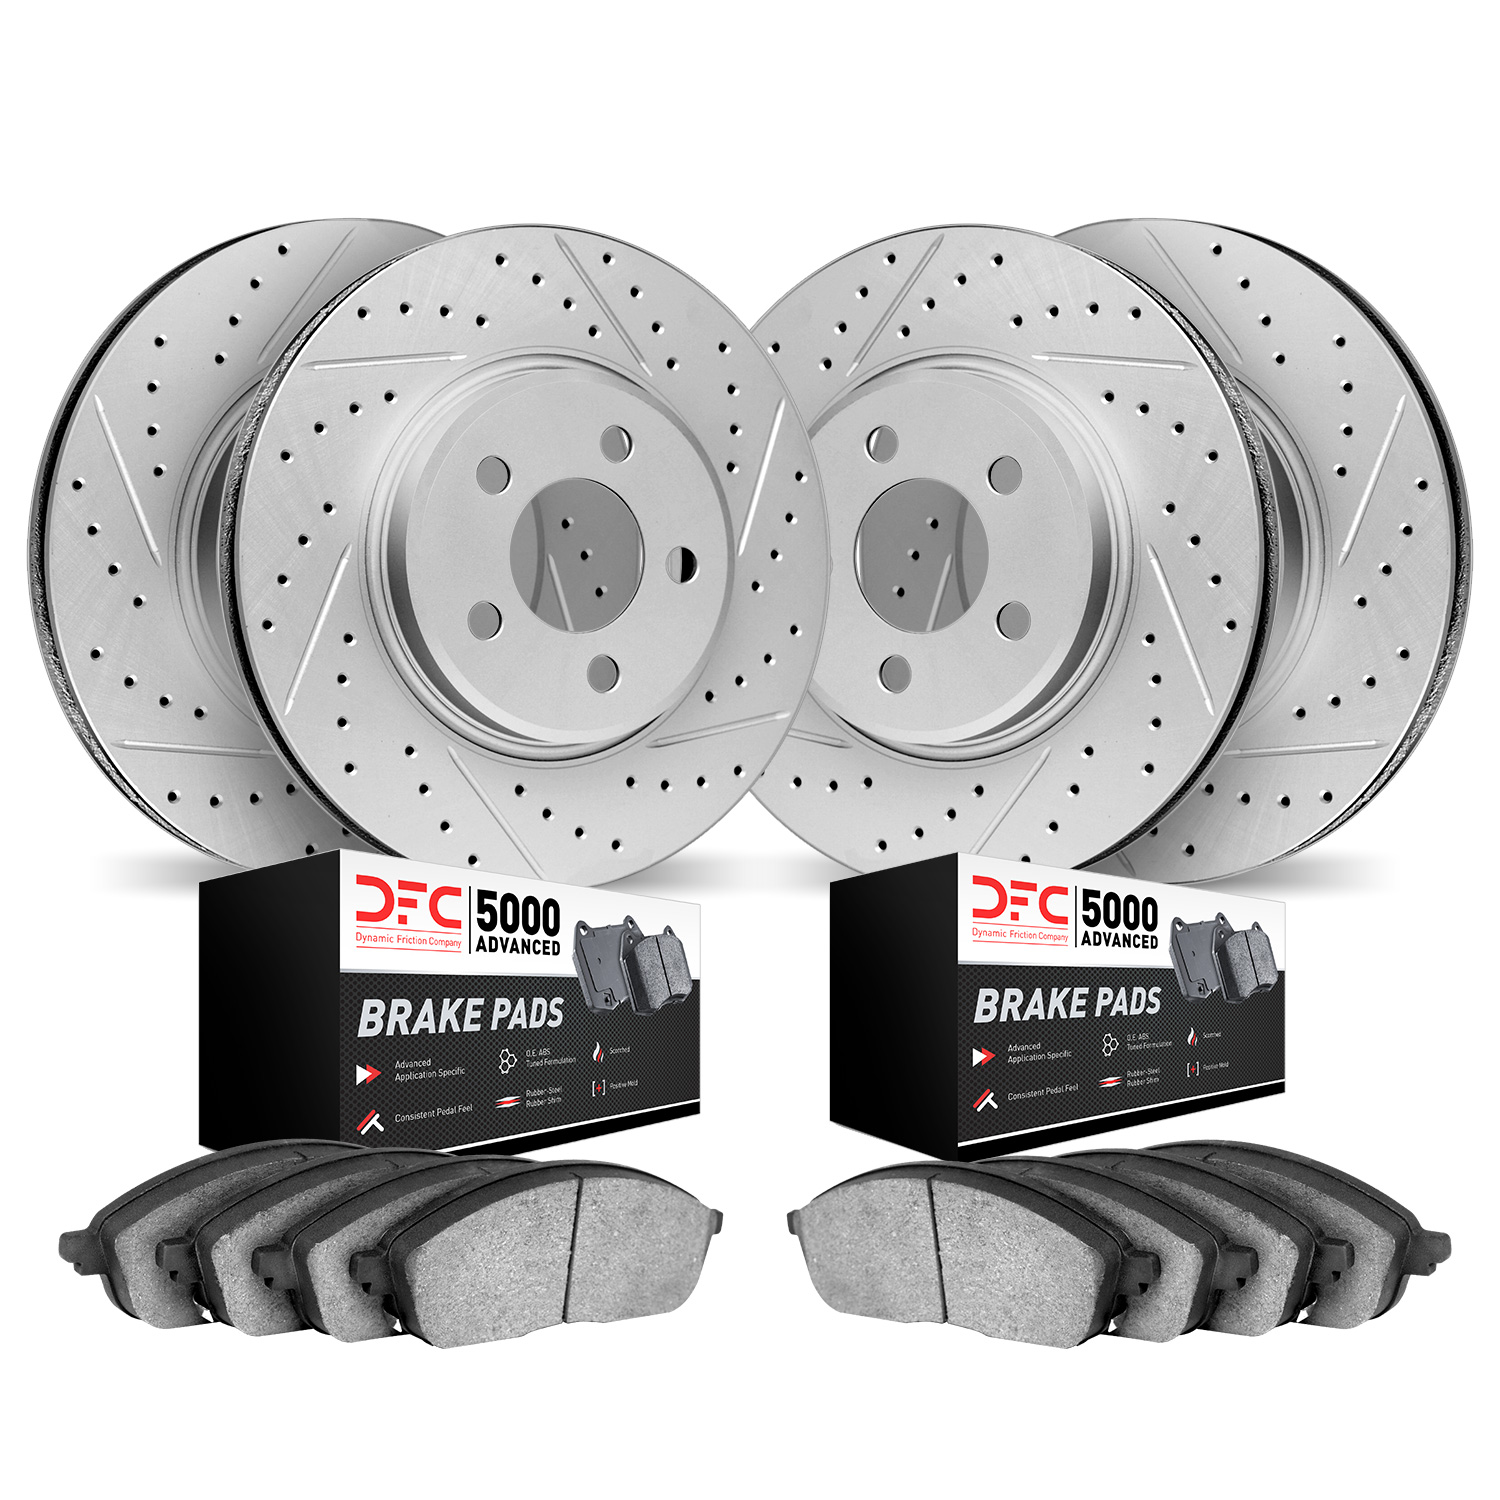 2504-31017 Geoperformance Drilled/Slotted Rotors w/5000 Advanced Brake Pads Kit, 2008-2011 BMW, Position: Front and Rear